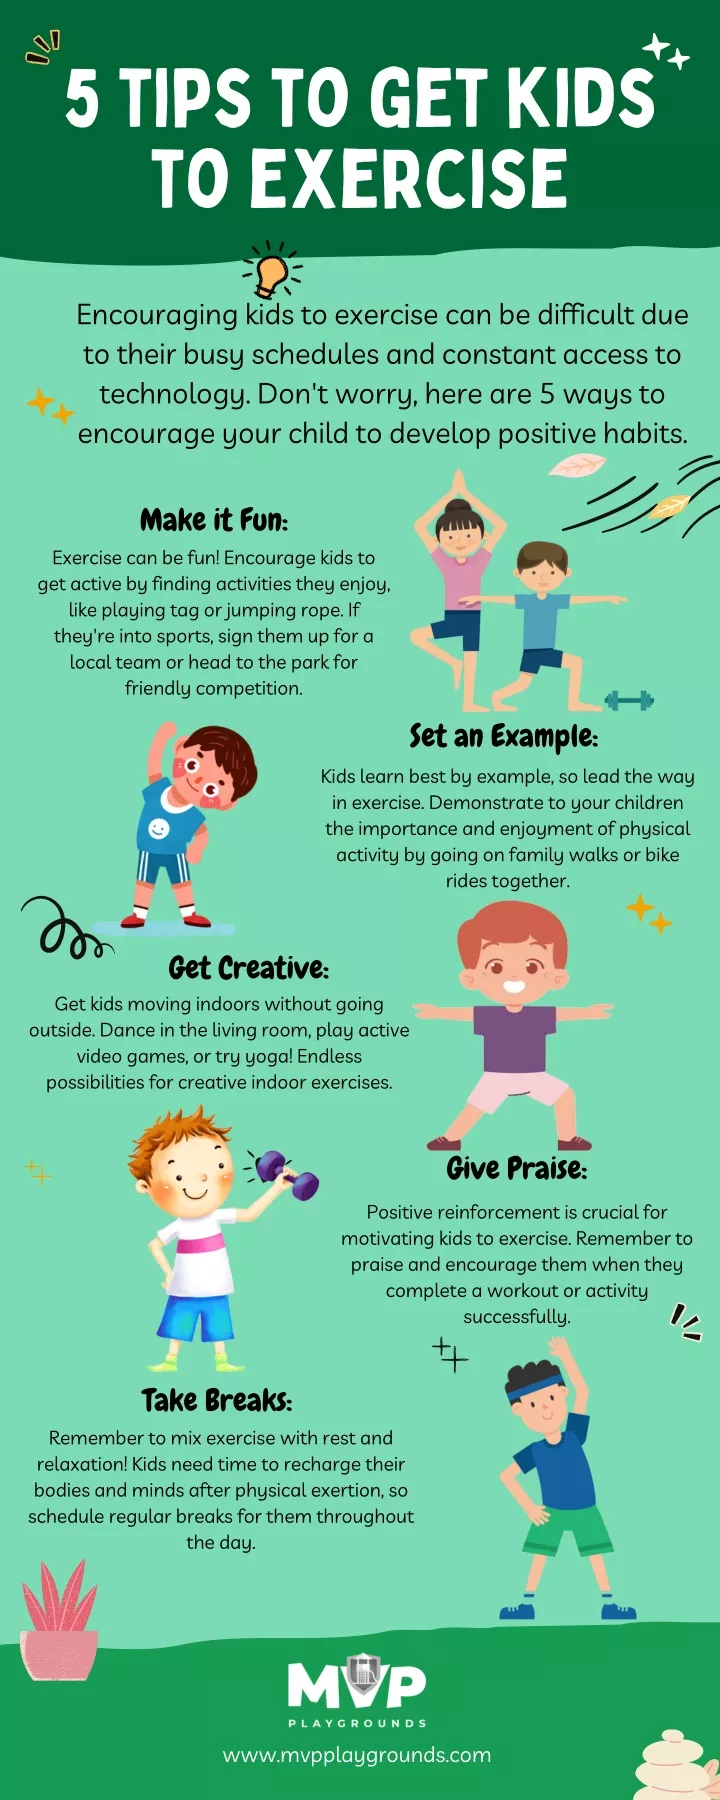 5 tips to get kids to exercise